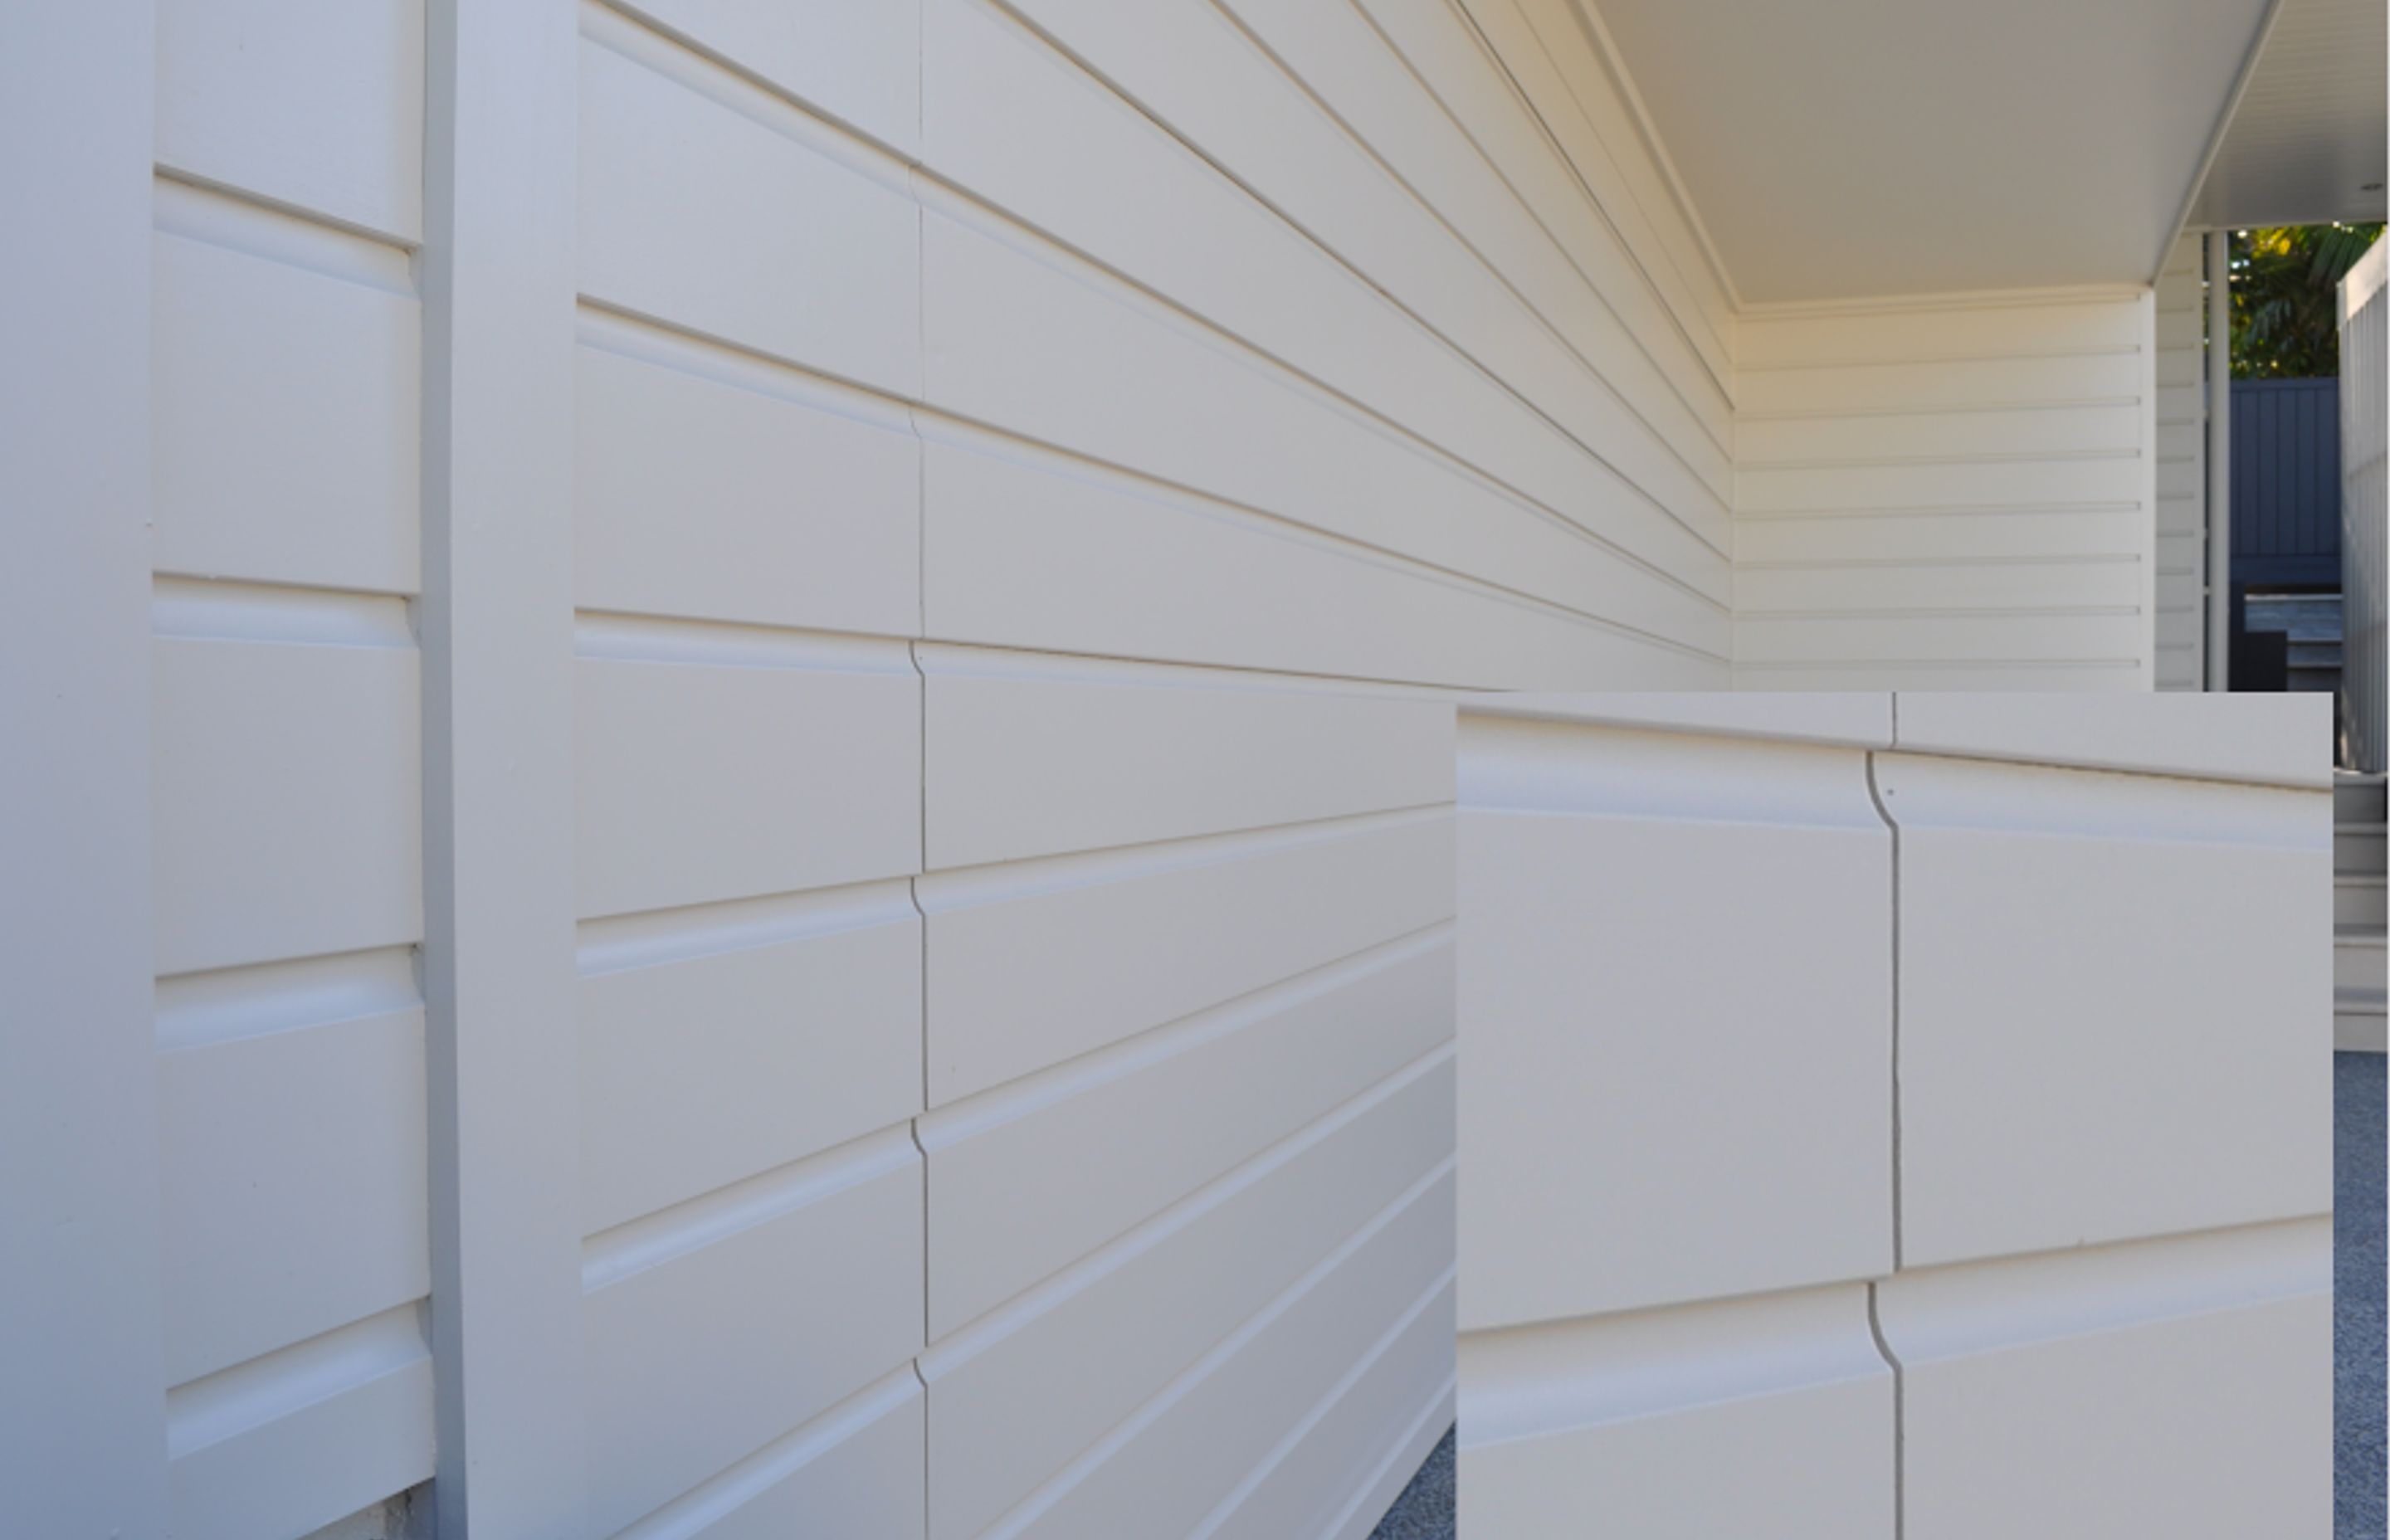 Seen here incorporating horizontal weatherboards, Flushmount garage doors can be custom made in a range of materials to suit any style of architecture from contemporary through to more traditional styles.